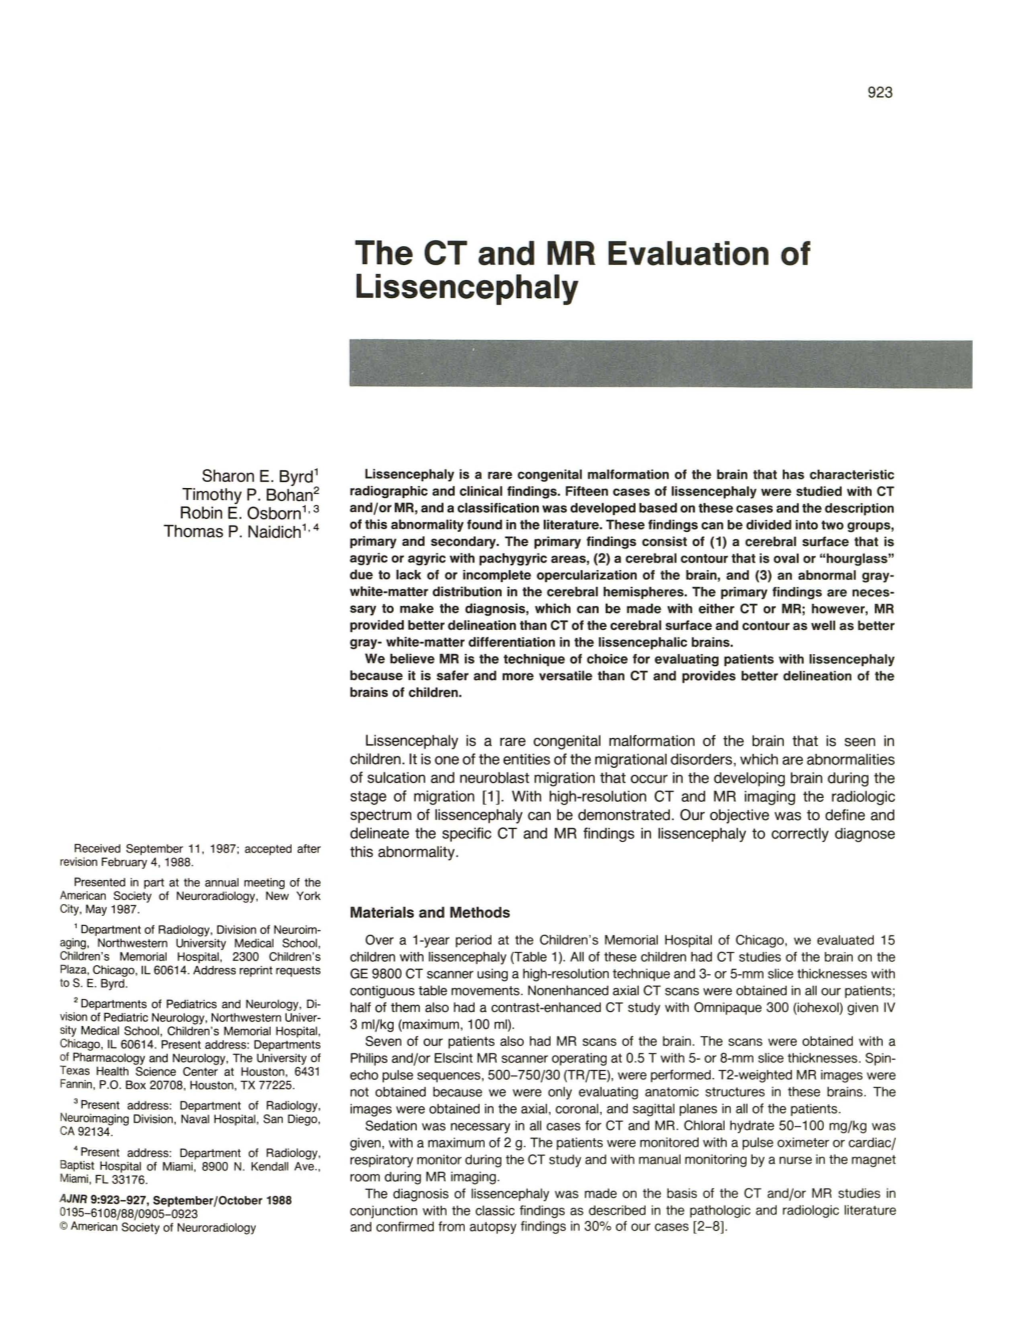 The CT and MR Evaluation of Lissencephaly